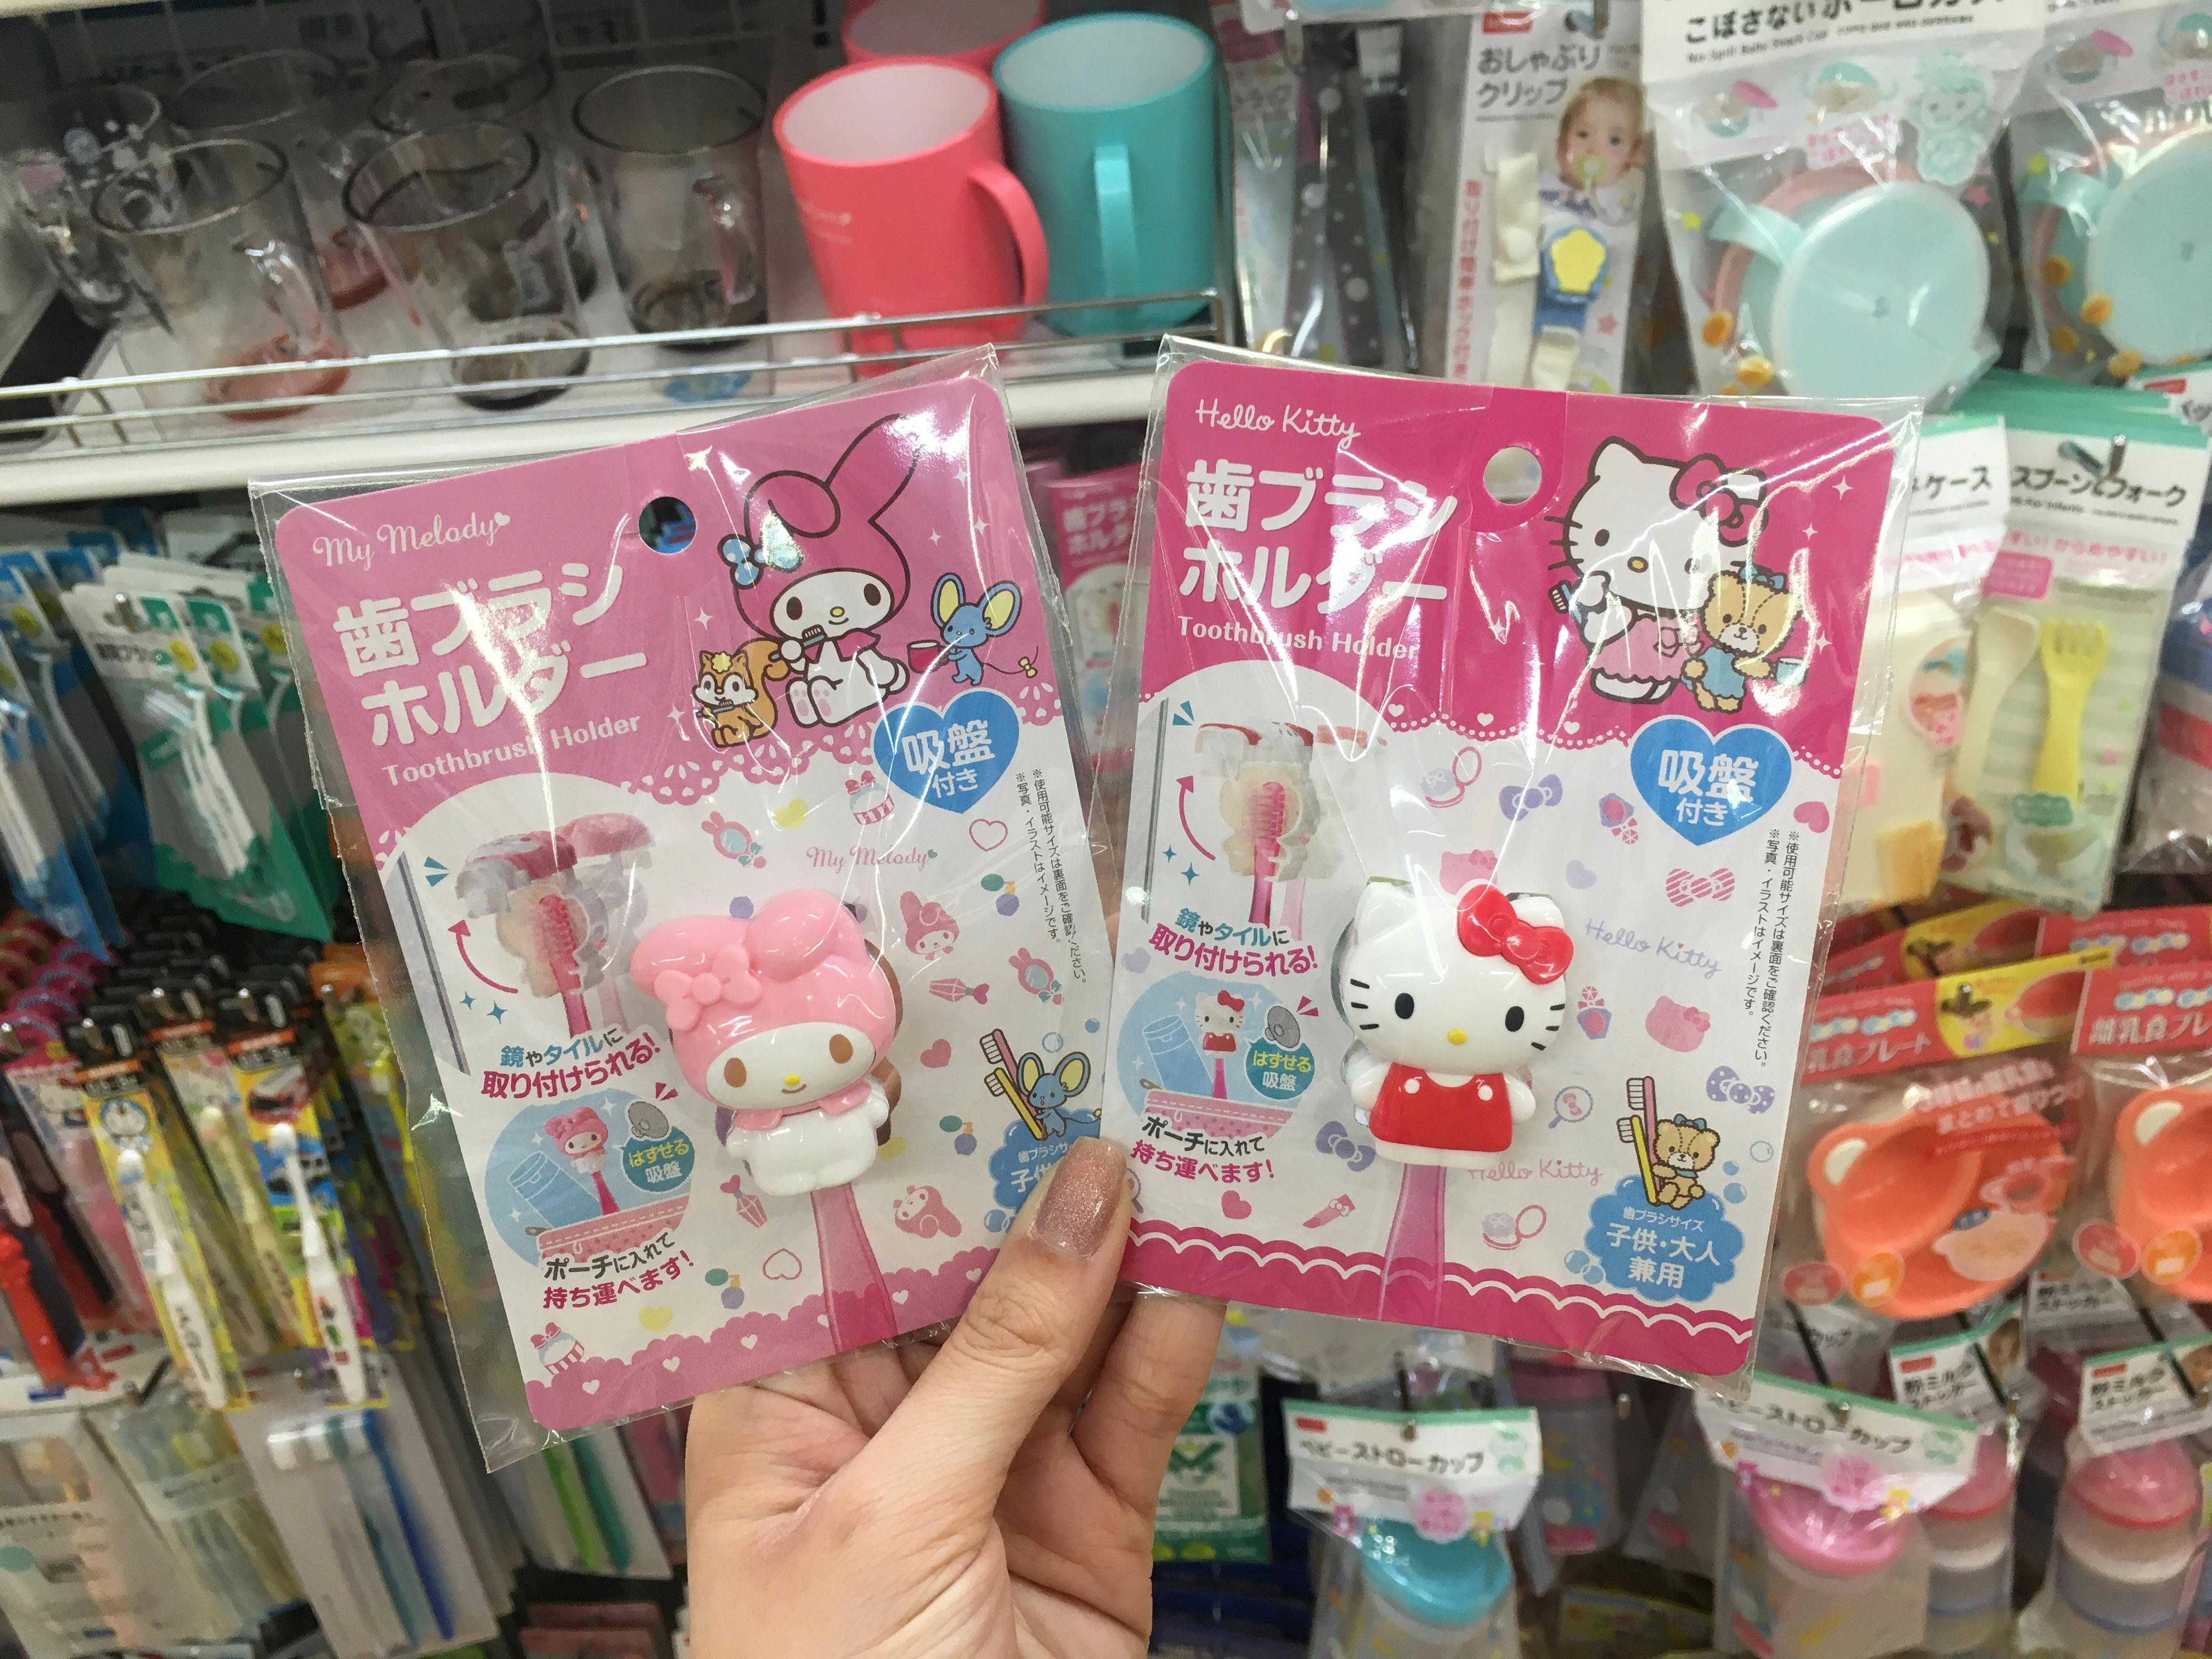 10 Kawaii Items You Can Buy At Daiso Yumetwins The Monthly Kawaii Subscription Box Straight From Tokyo To Your Door